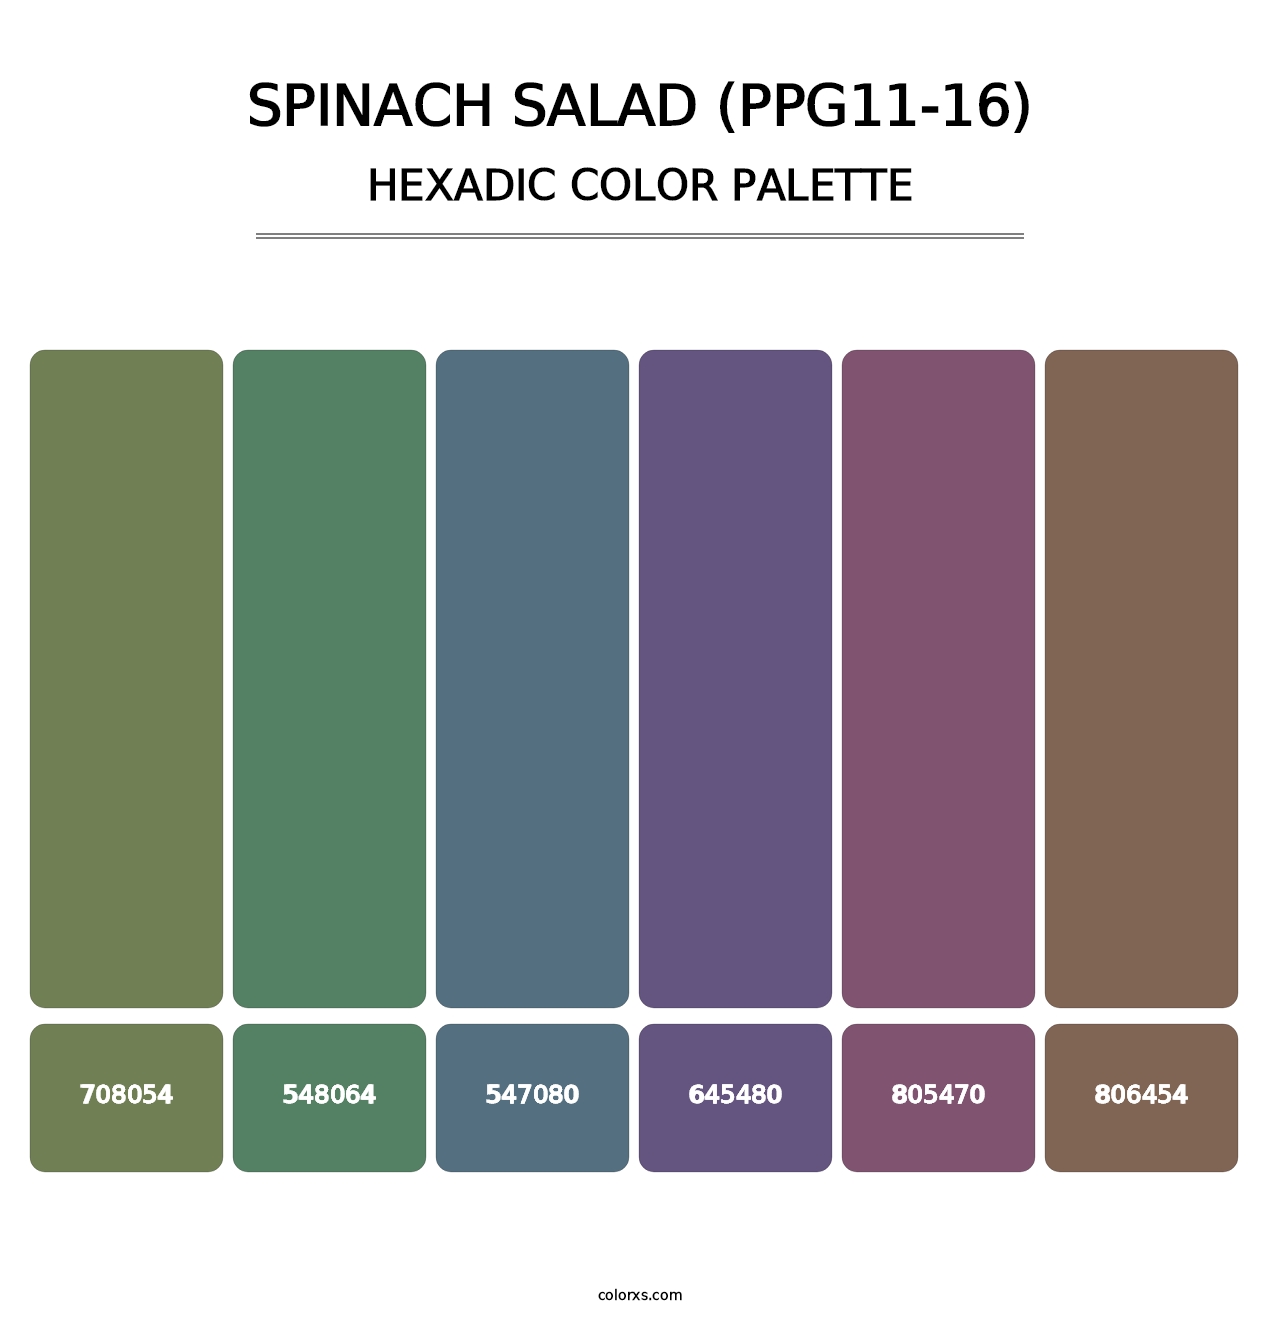 Spinach Salad (PPG11-16) - Hexadic Color Palette